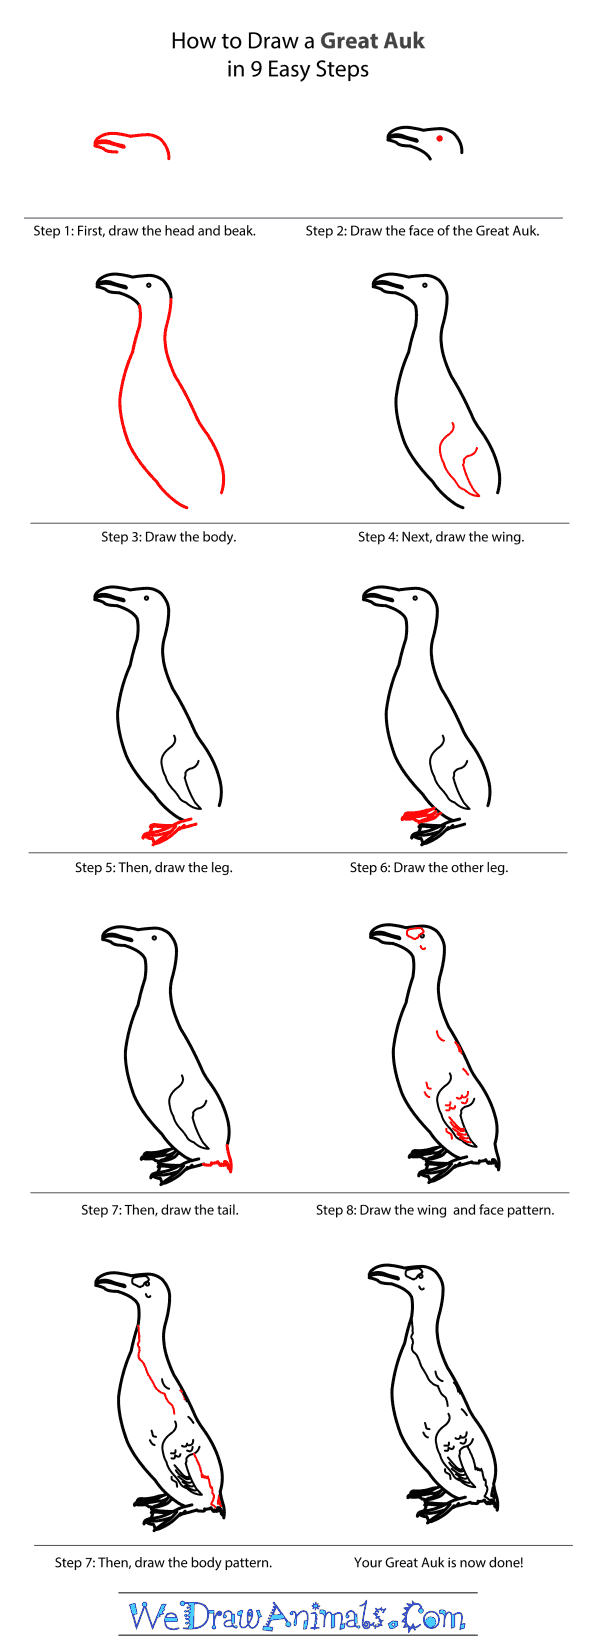 How to Draw a Great Auk - Step-by-Step Tutorial